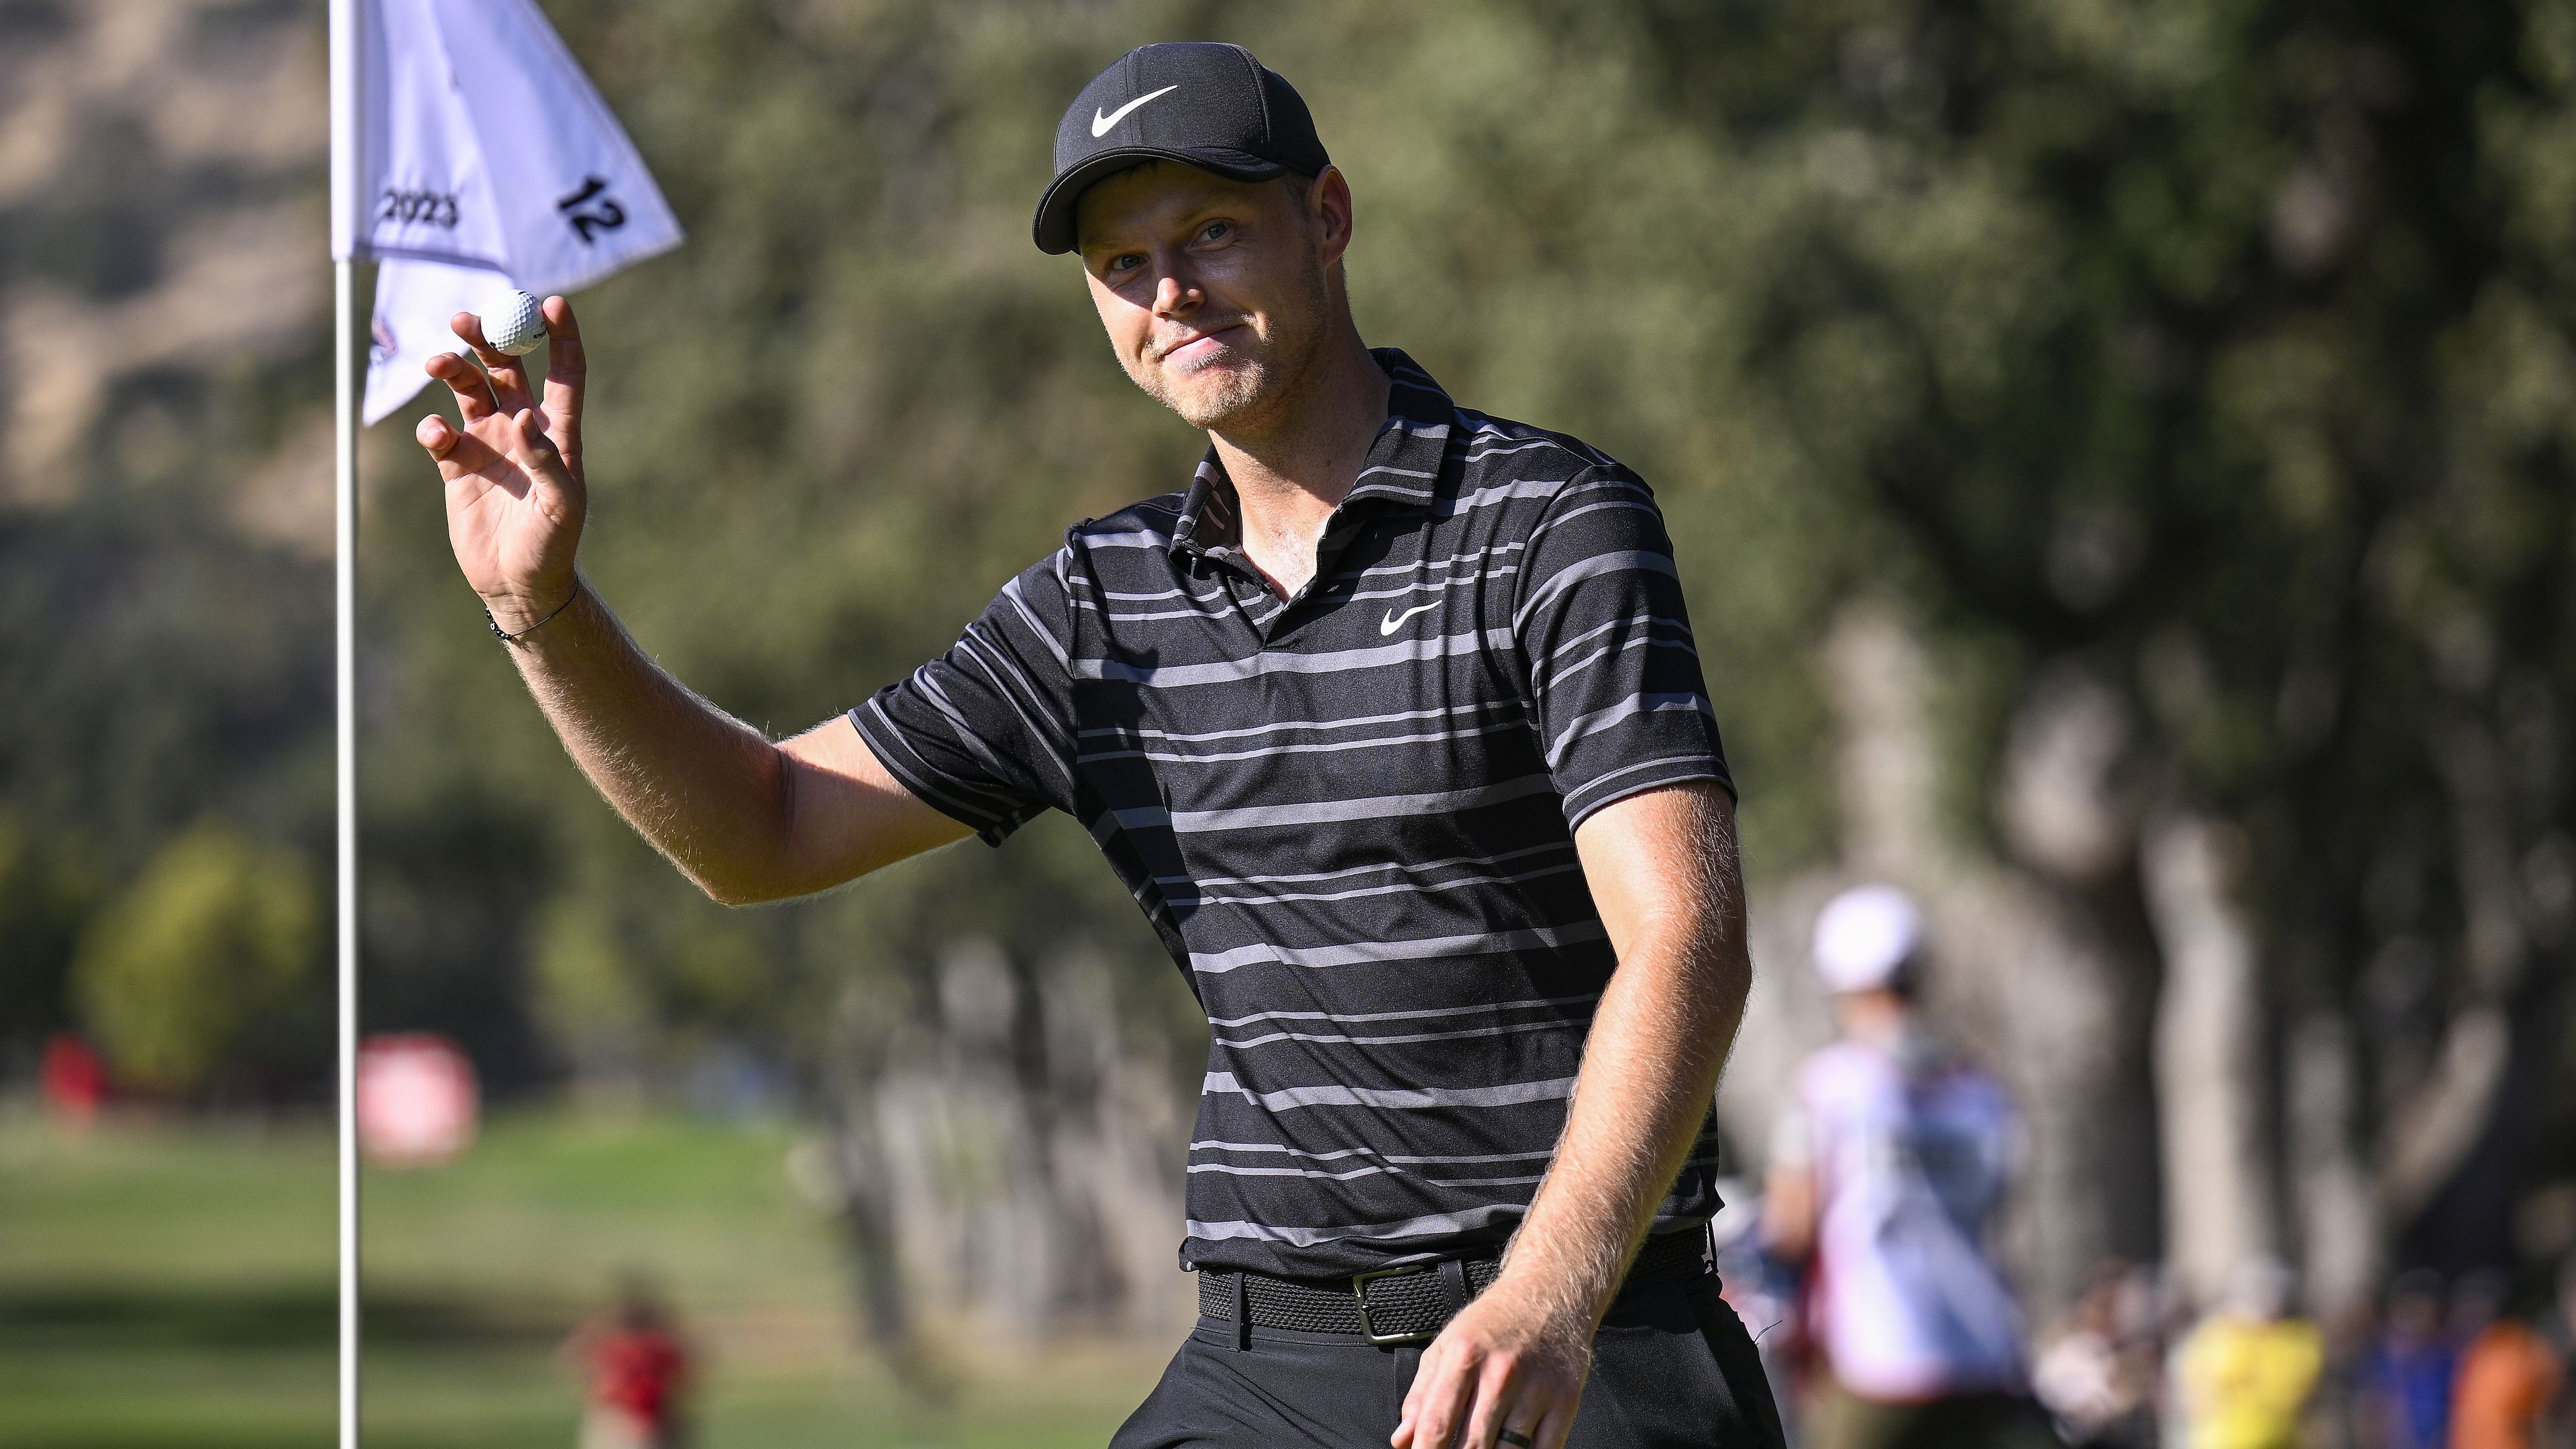 Cameron Davis of Australia waves after holing out on the 12th hole during the final round of the Fortinet Championship.